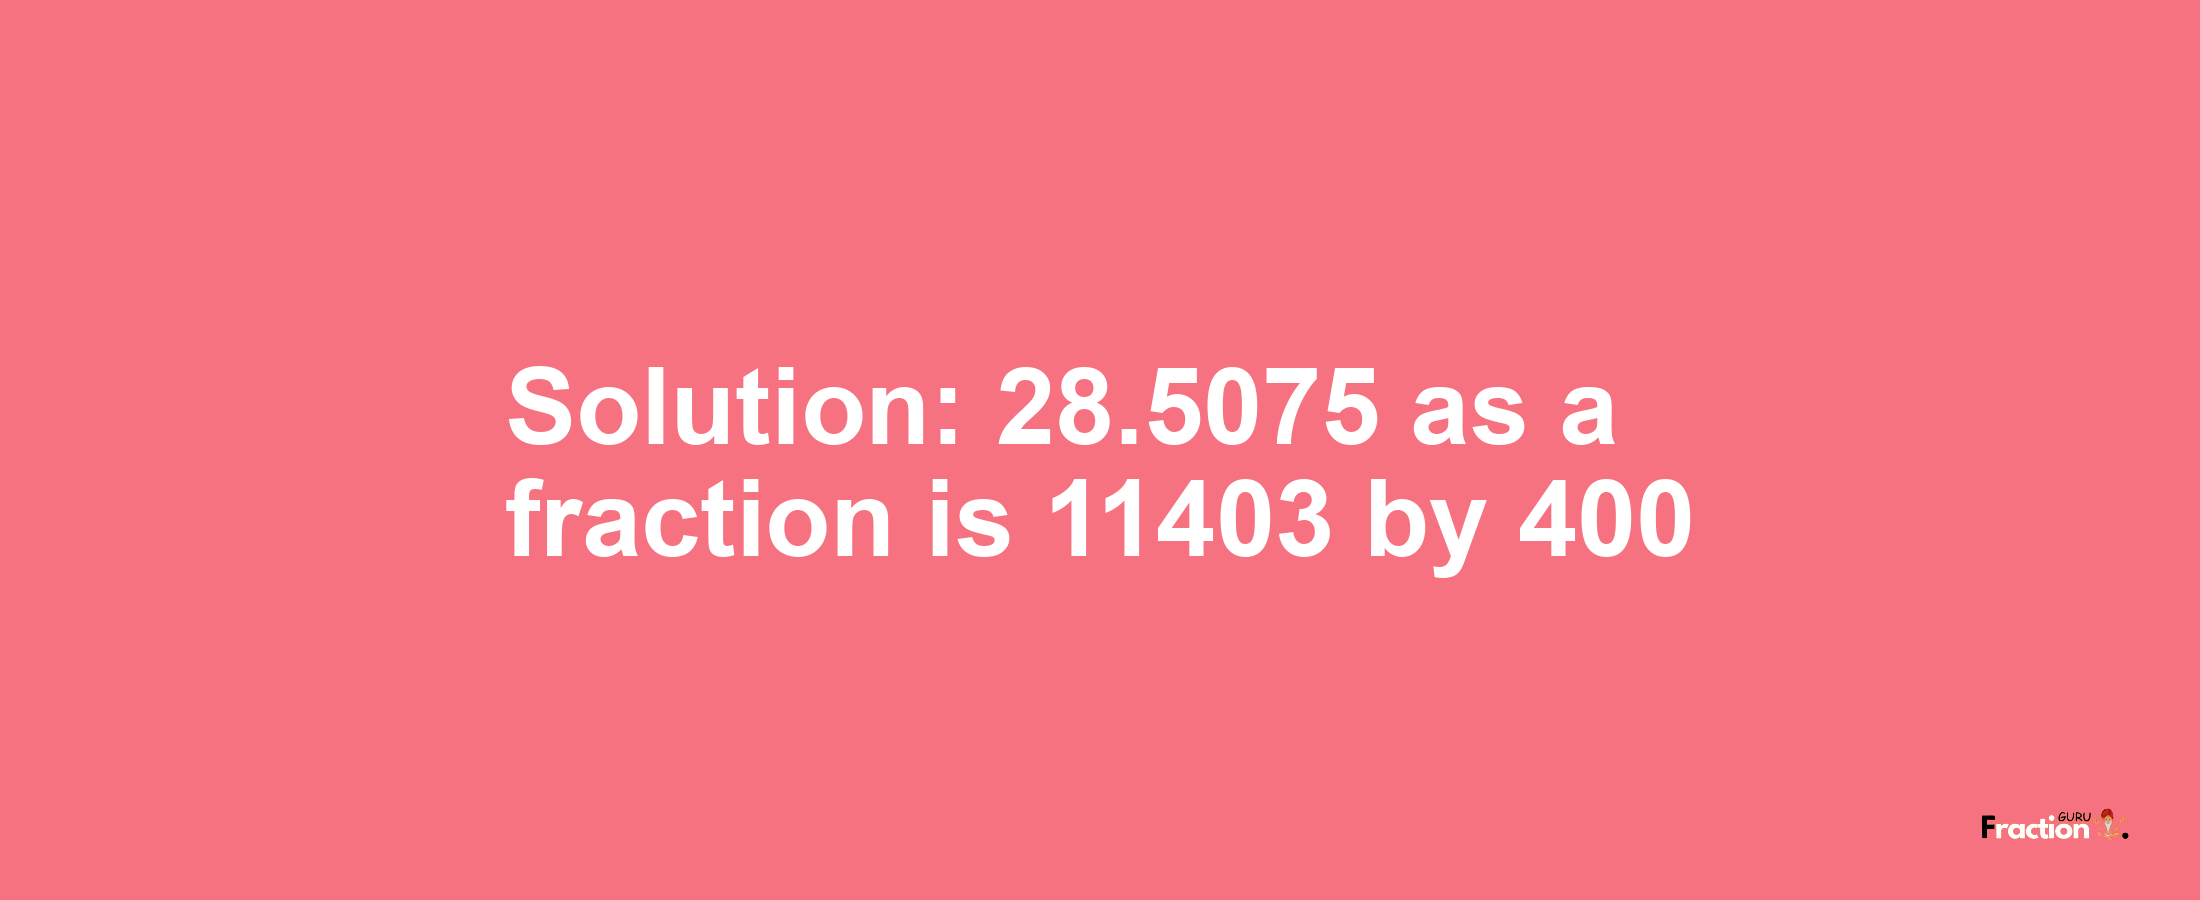 Solution:28.5075 as a fraction is 11403/400